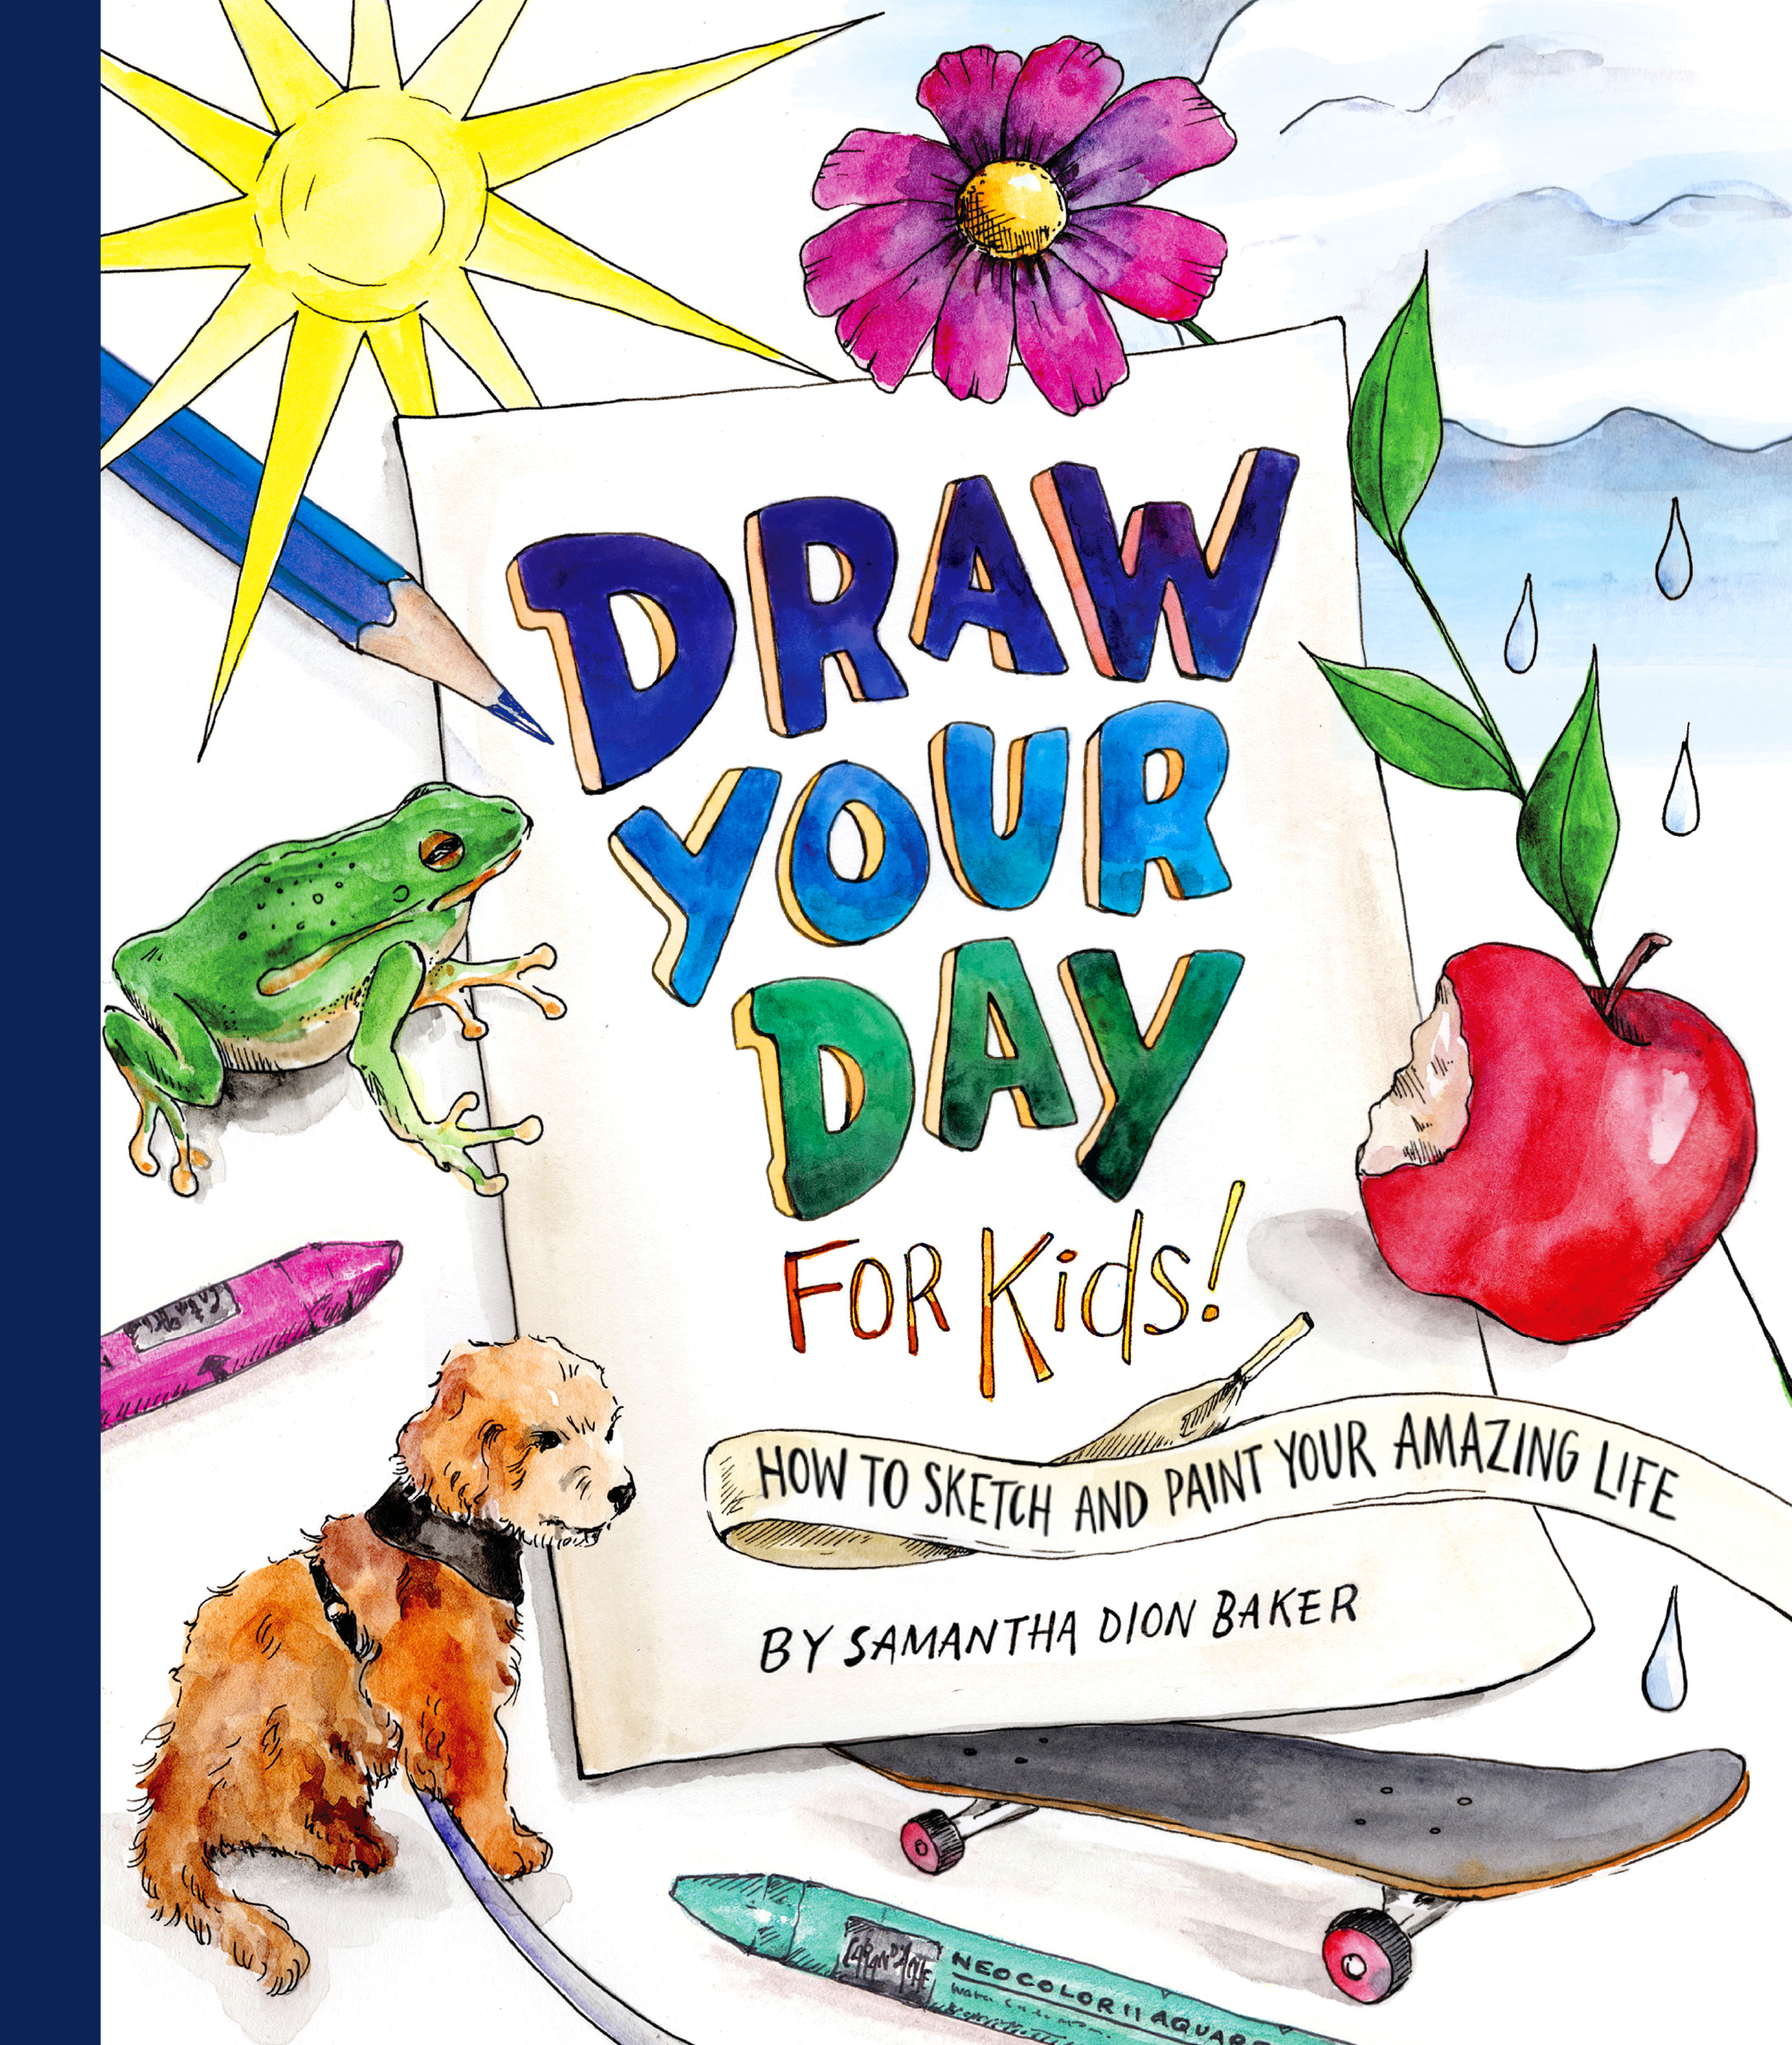 Draw Your Day for Kids! : How to Sketch and Paint Your Amazing Life | Baker, Samantha Dion